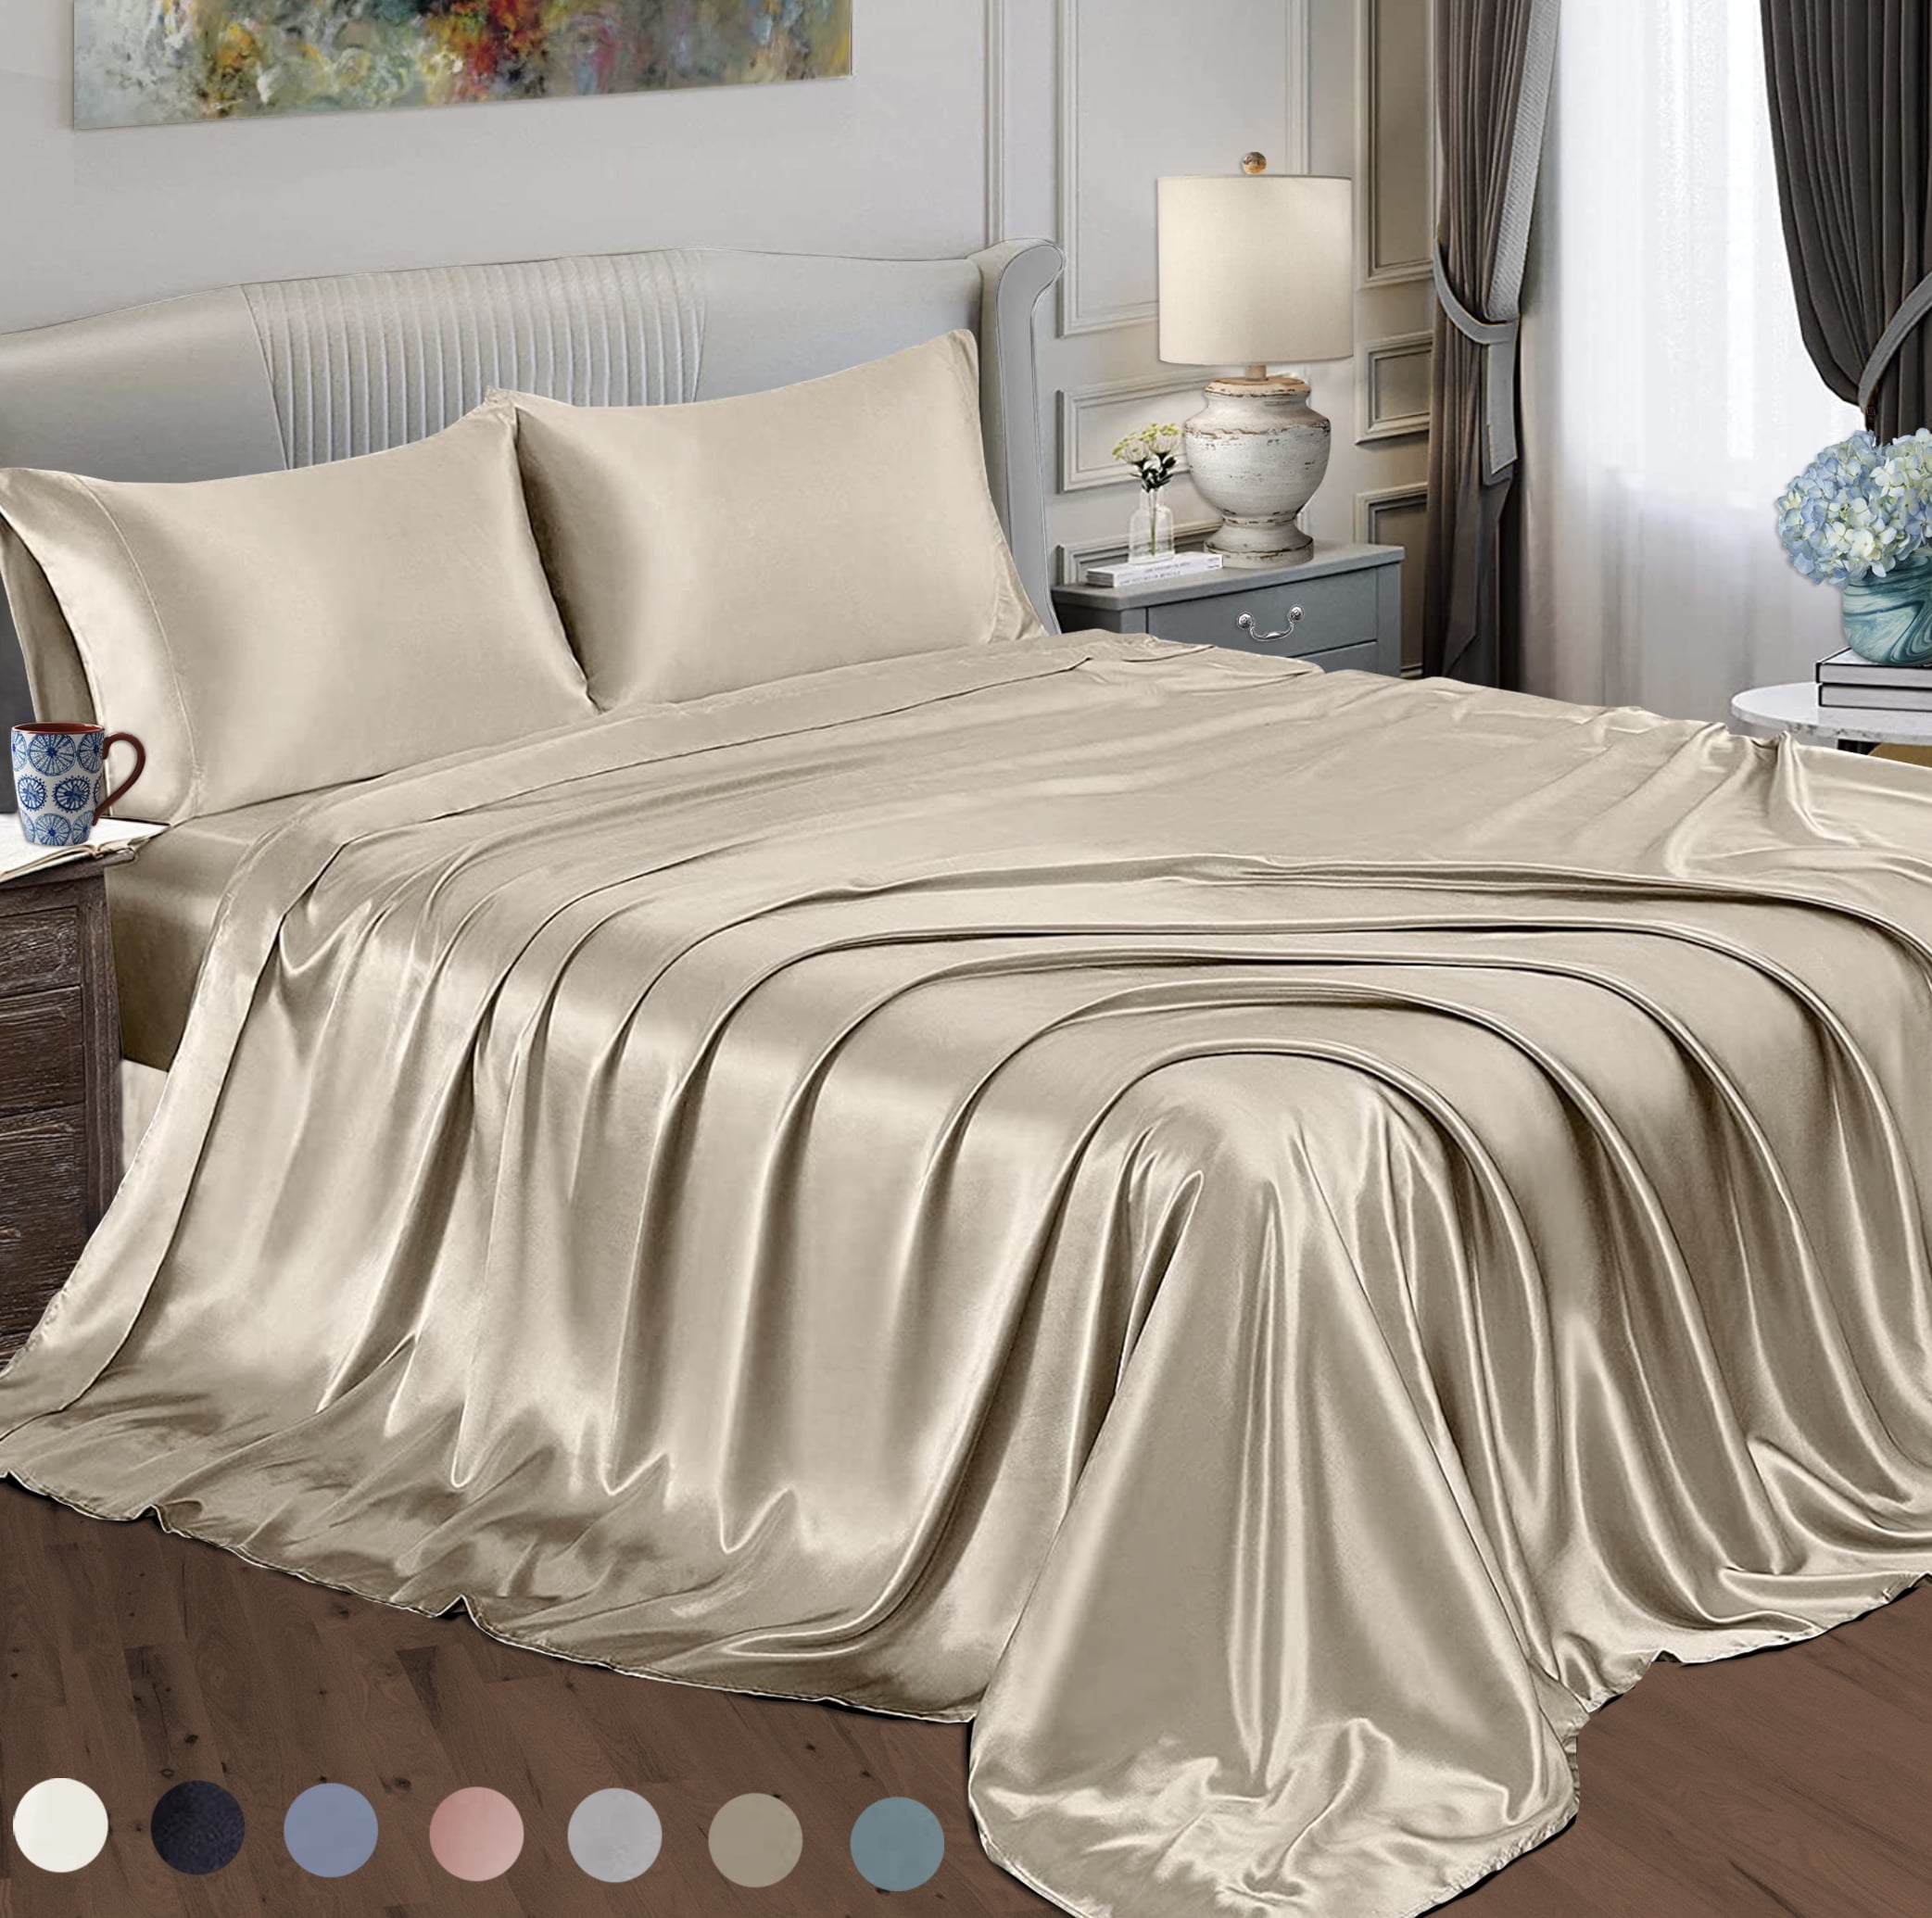 LUXURY IVORY SOLID SATIN SILK POLYESTER 1PC COMFORTER 100 GSM 200 GSM 300 GSM 